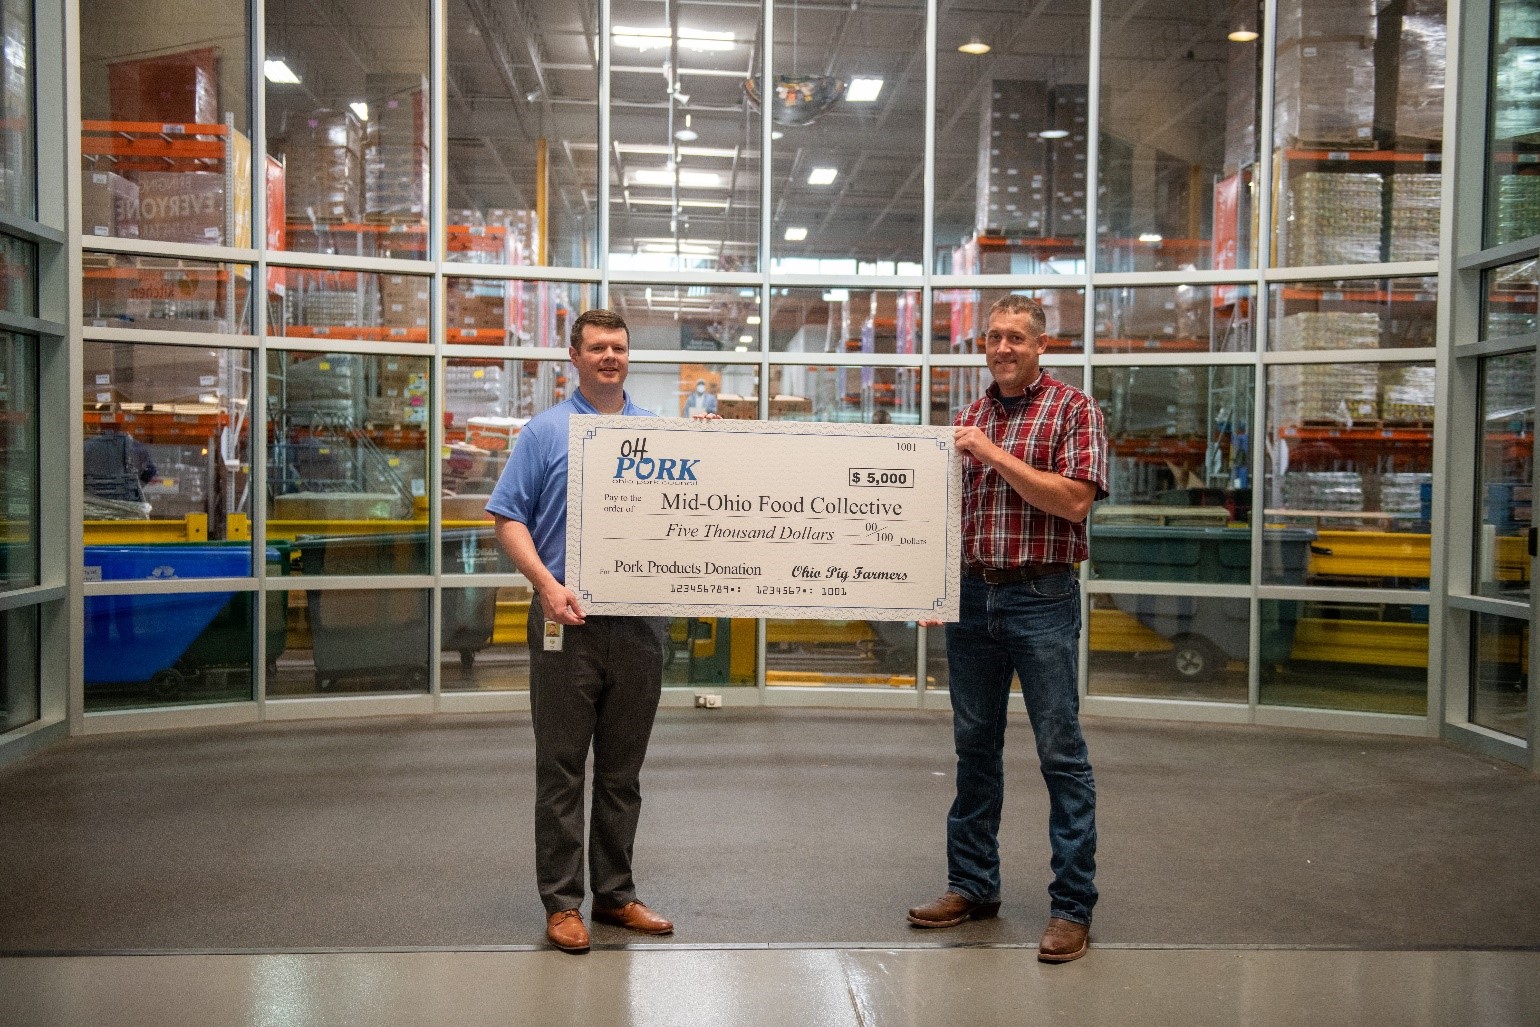  Ohio Pork Council President, Nick Seger (right), a producer from Minster, Ohio, presented a check to Craig Truax, director of corporate partnerships for the Mid-Ohio Food Collective for $5,000. The organization will use the funds to purchase pork that it will serve to those in need through its Mid-Ohio kitchen in Columbus.